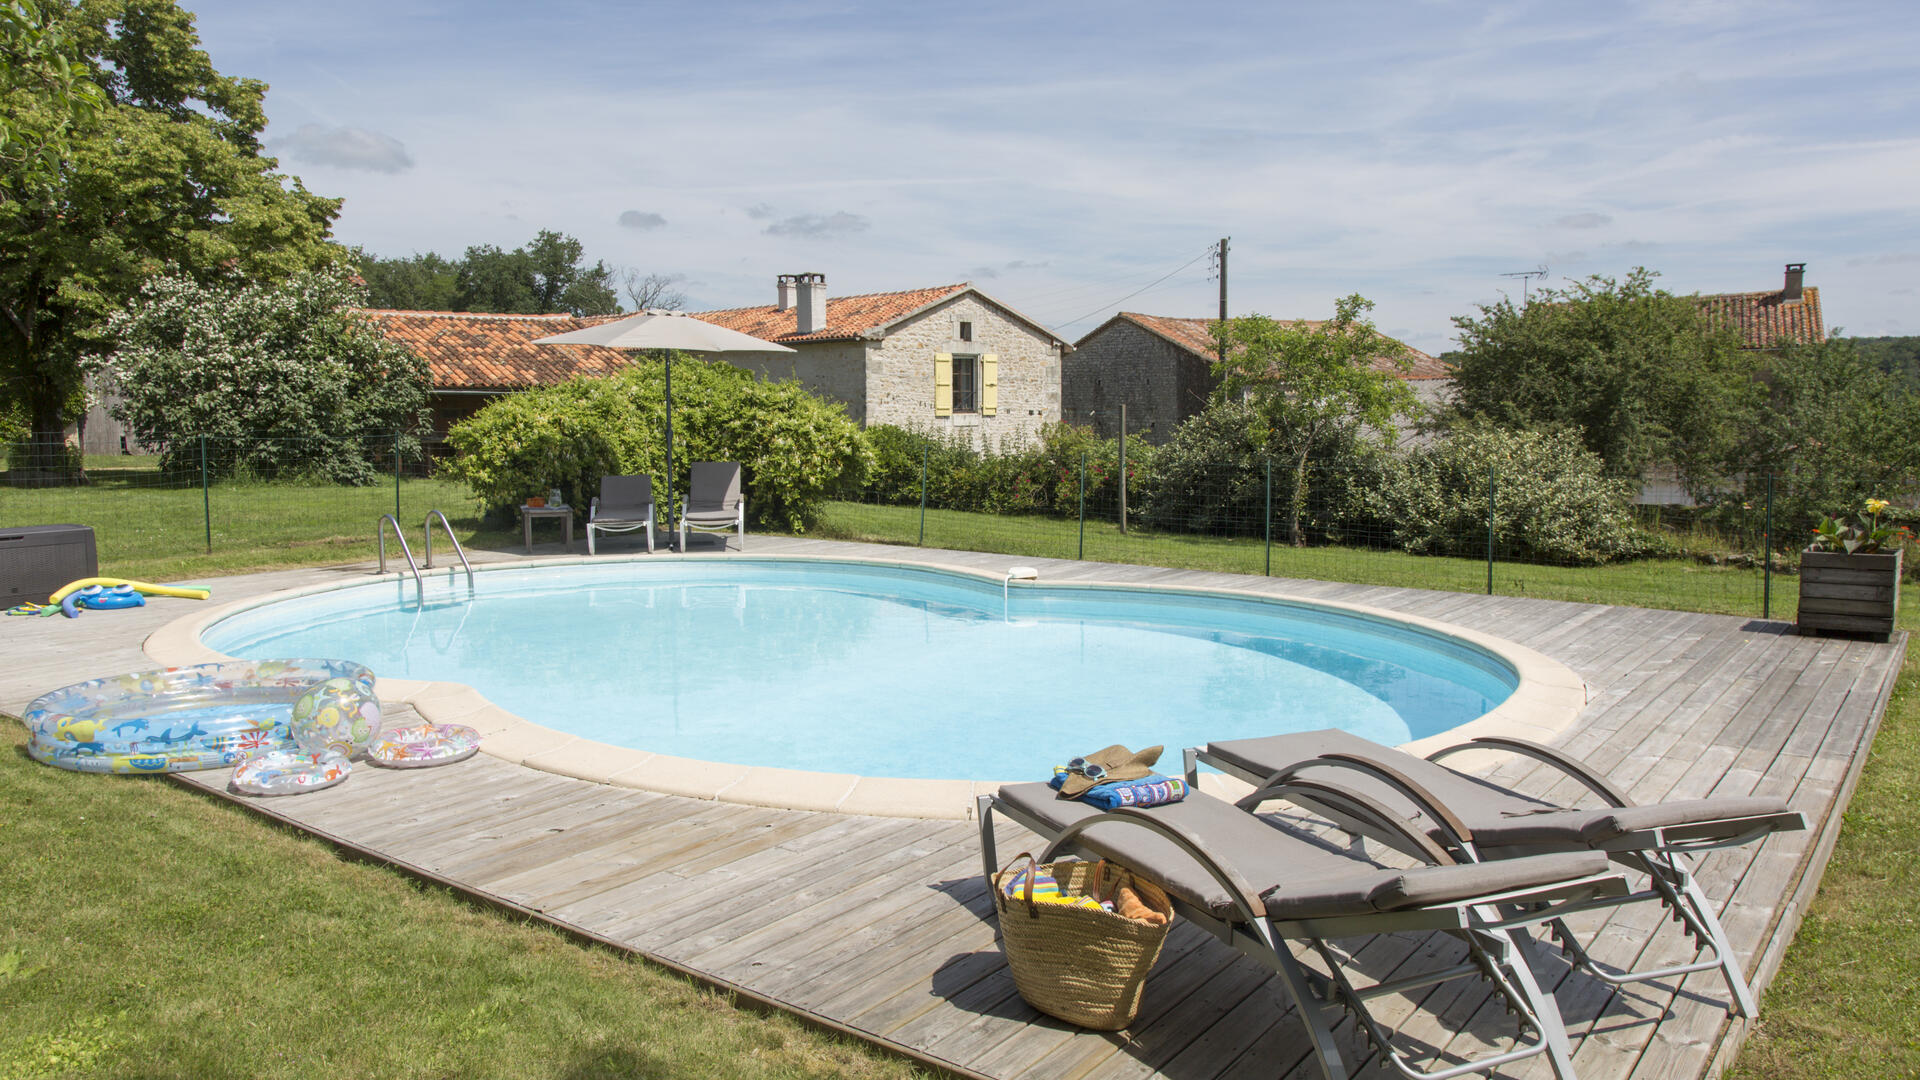 3 bedroom traditional French farmhouse perfect for your family 